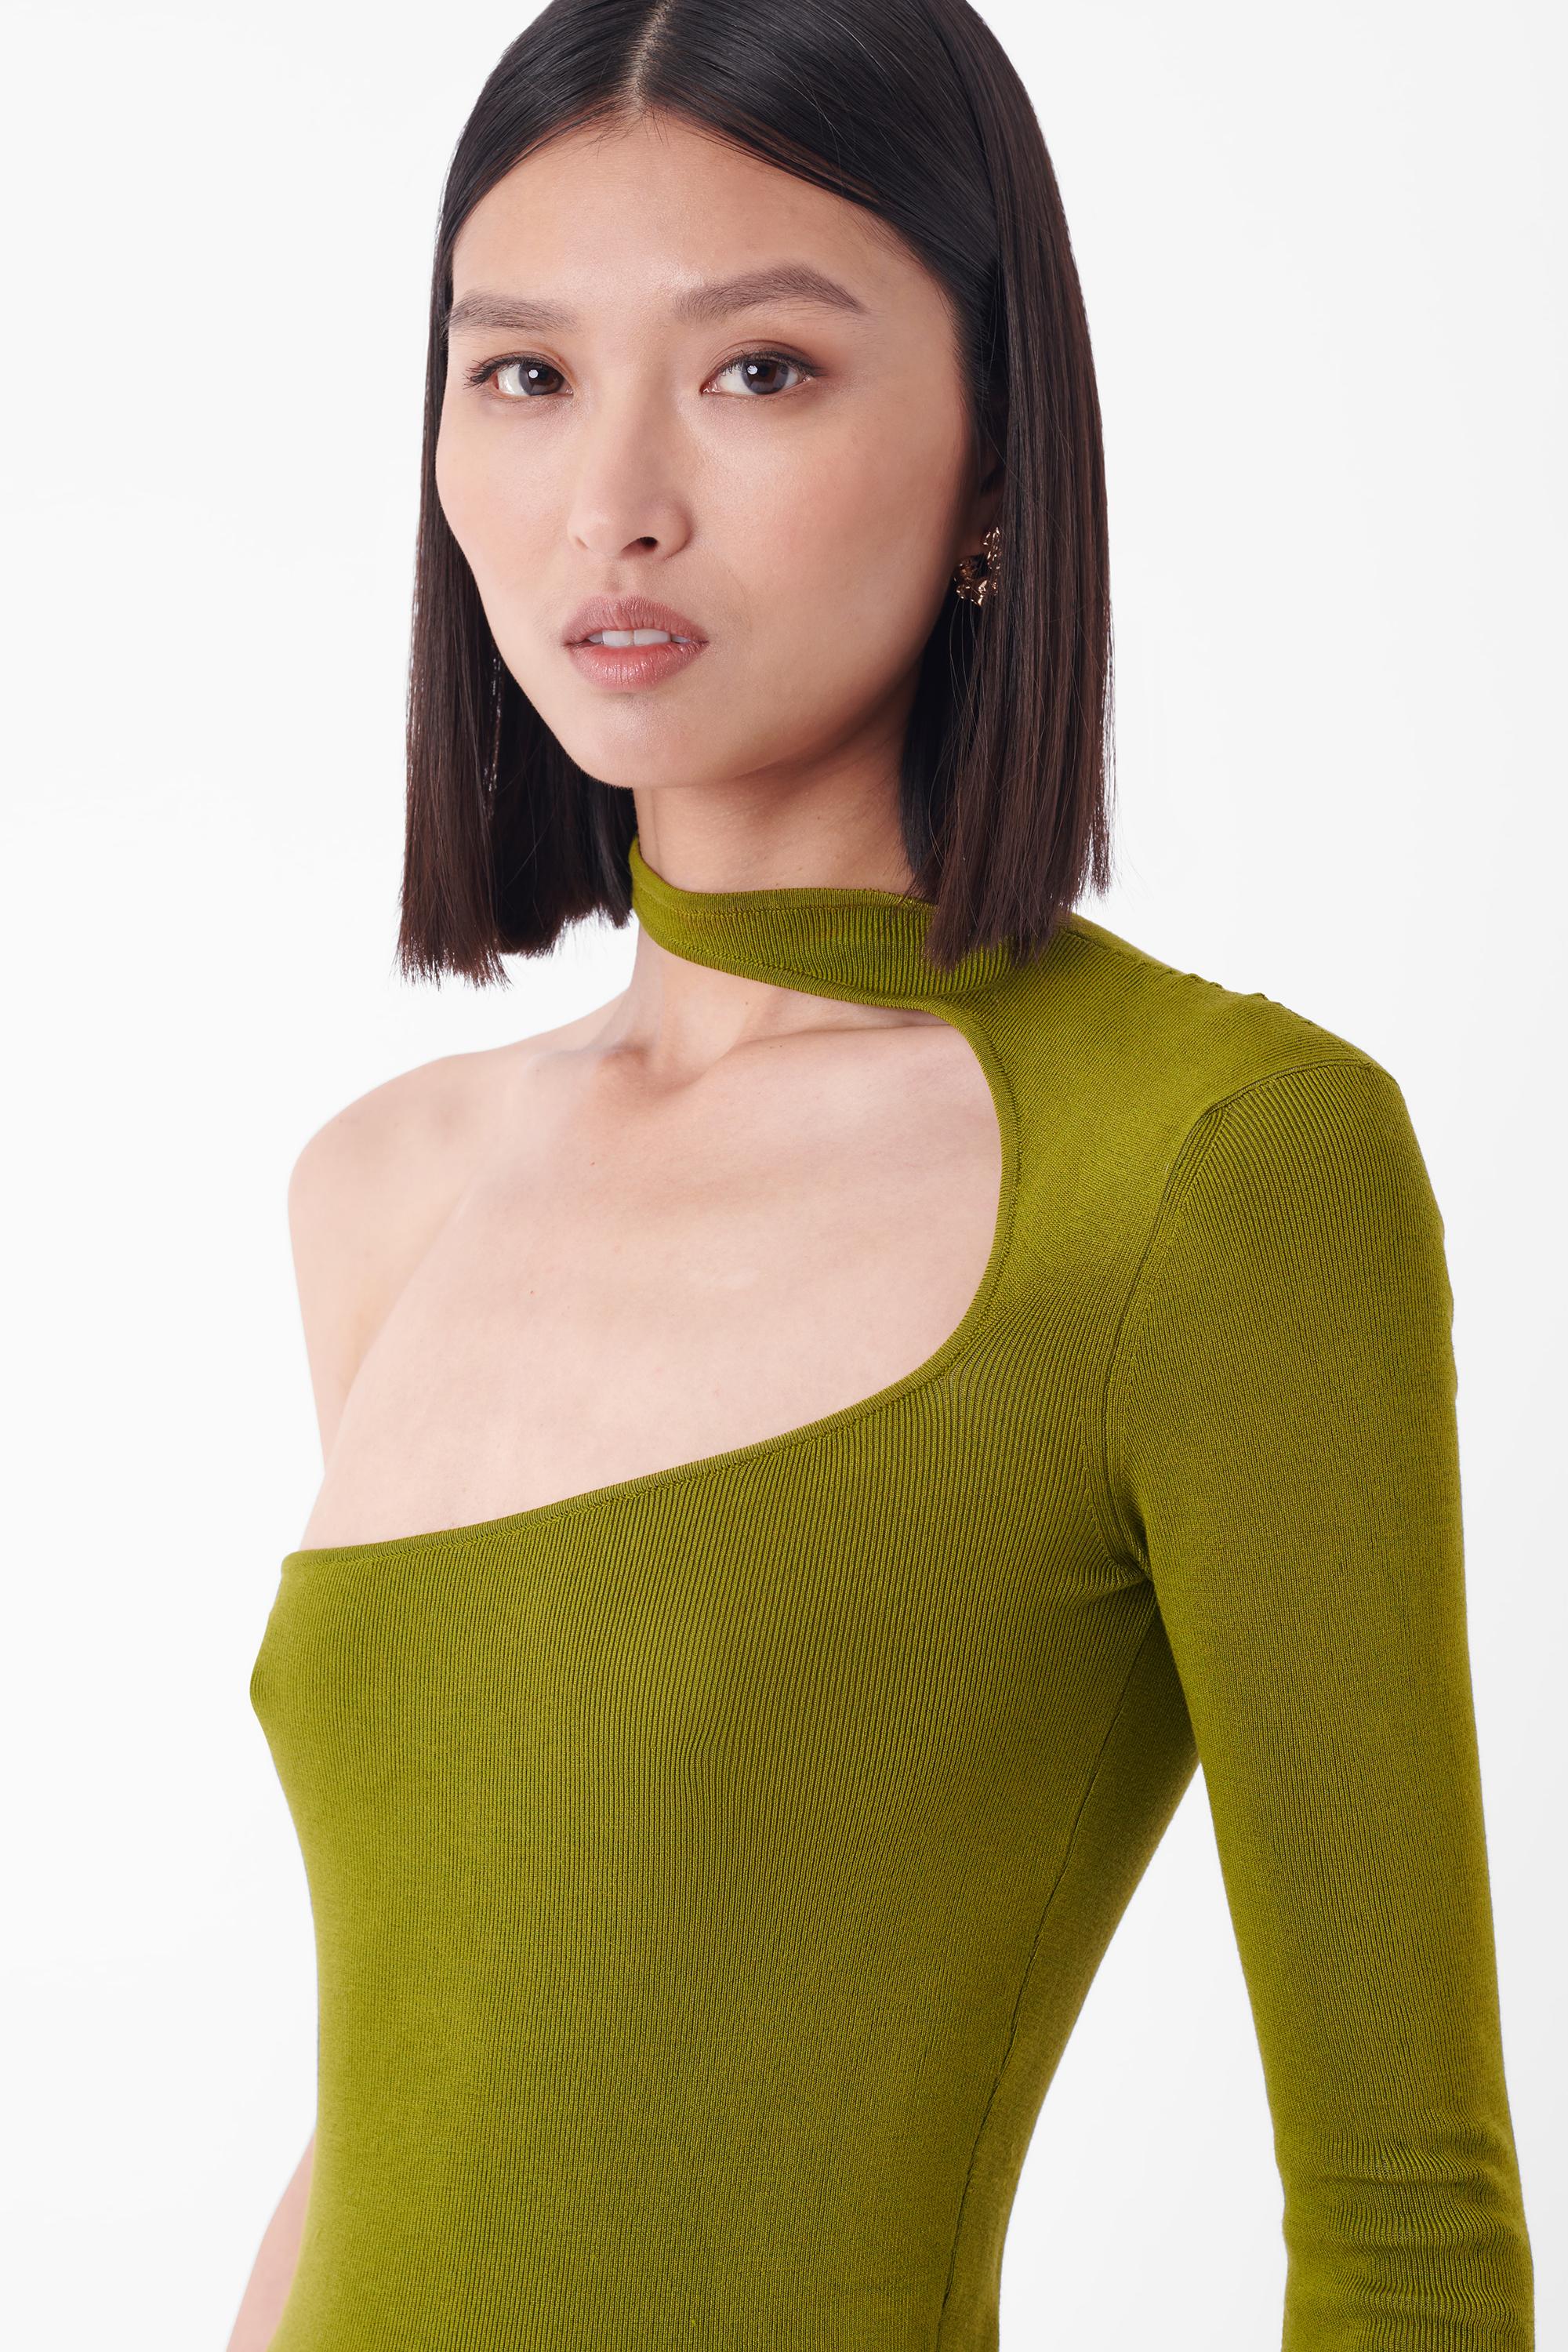 We are excited to present this Tom Ford for Gucci one sleeve green top. Features one long sleeve detail, neck keyhole detailing and stretch bodycon fit. In good vintage condition.

Brand: Gucci
Size: UK 8
Color: Green
Tag Size: S
Modern Size: UK: 8,